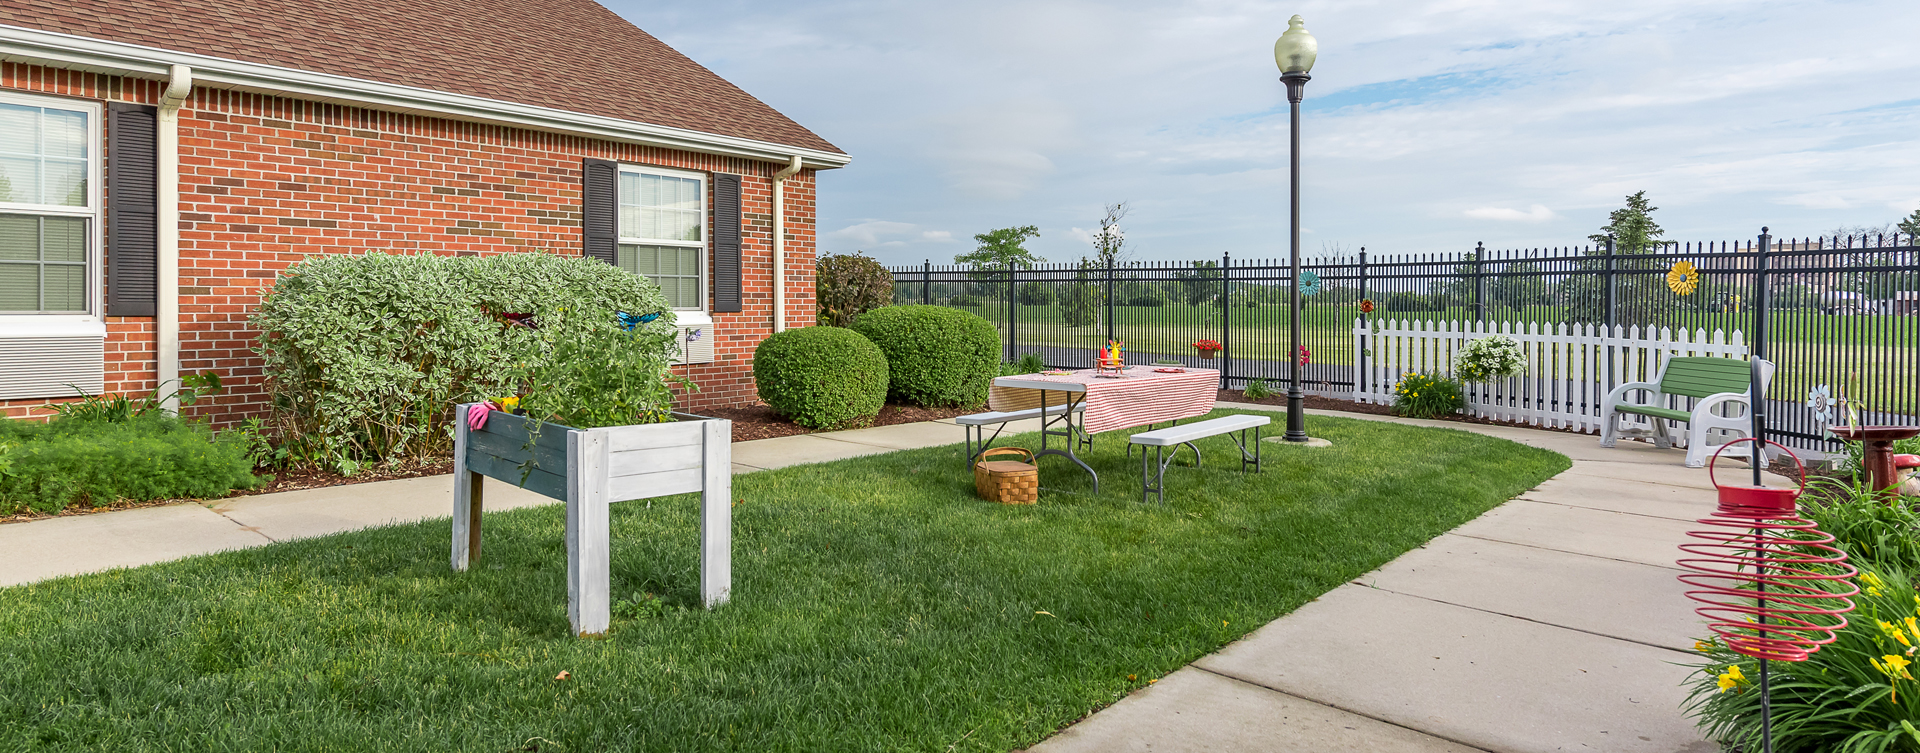 Residents with dementia can enjoy the outdoors by stepping into our secure courtyard at Bickford of Saginaw Township